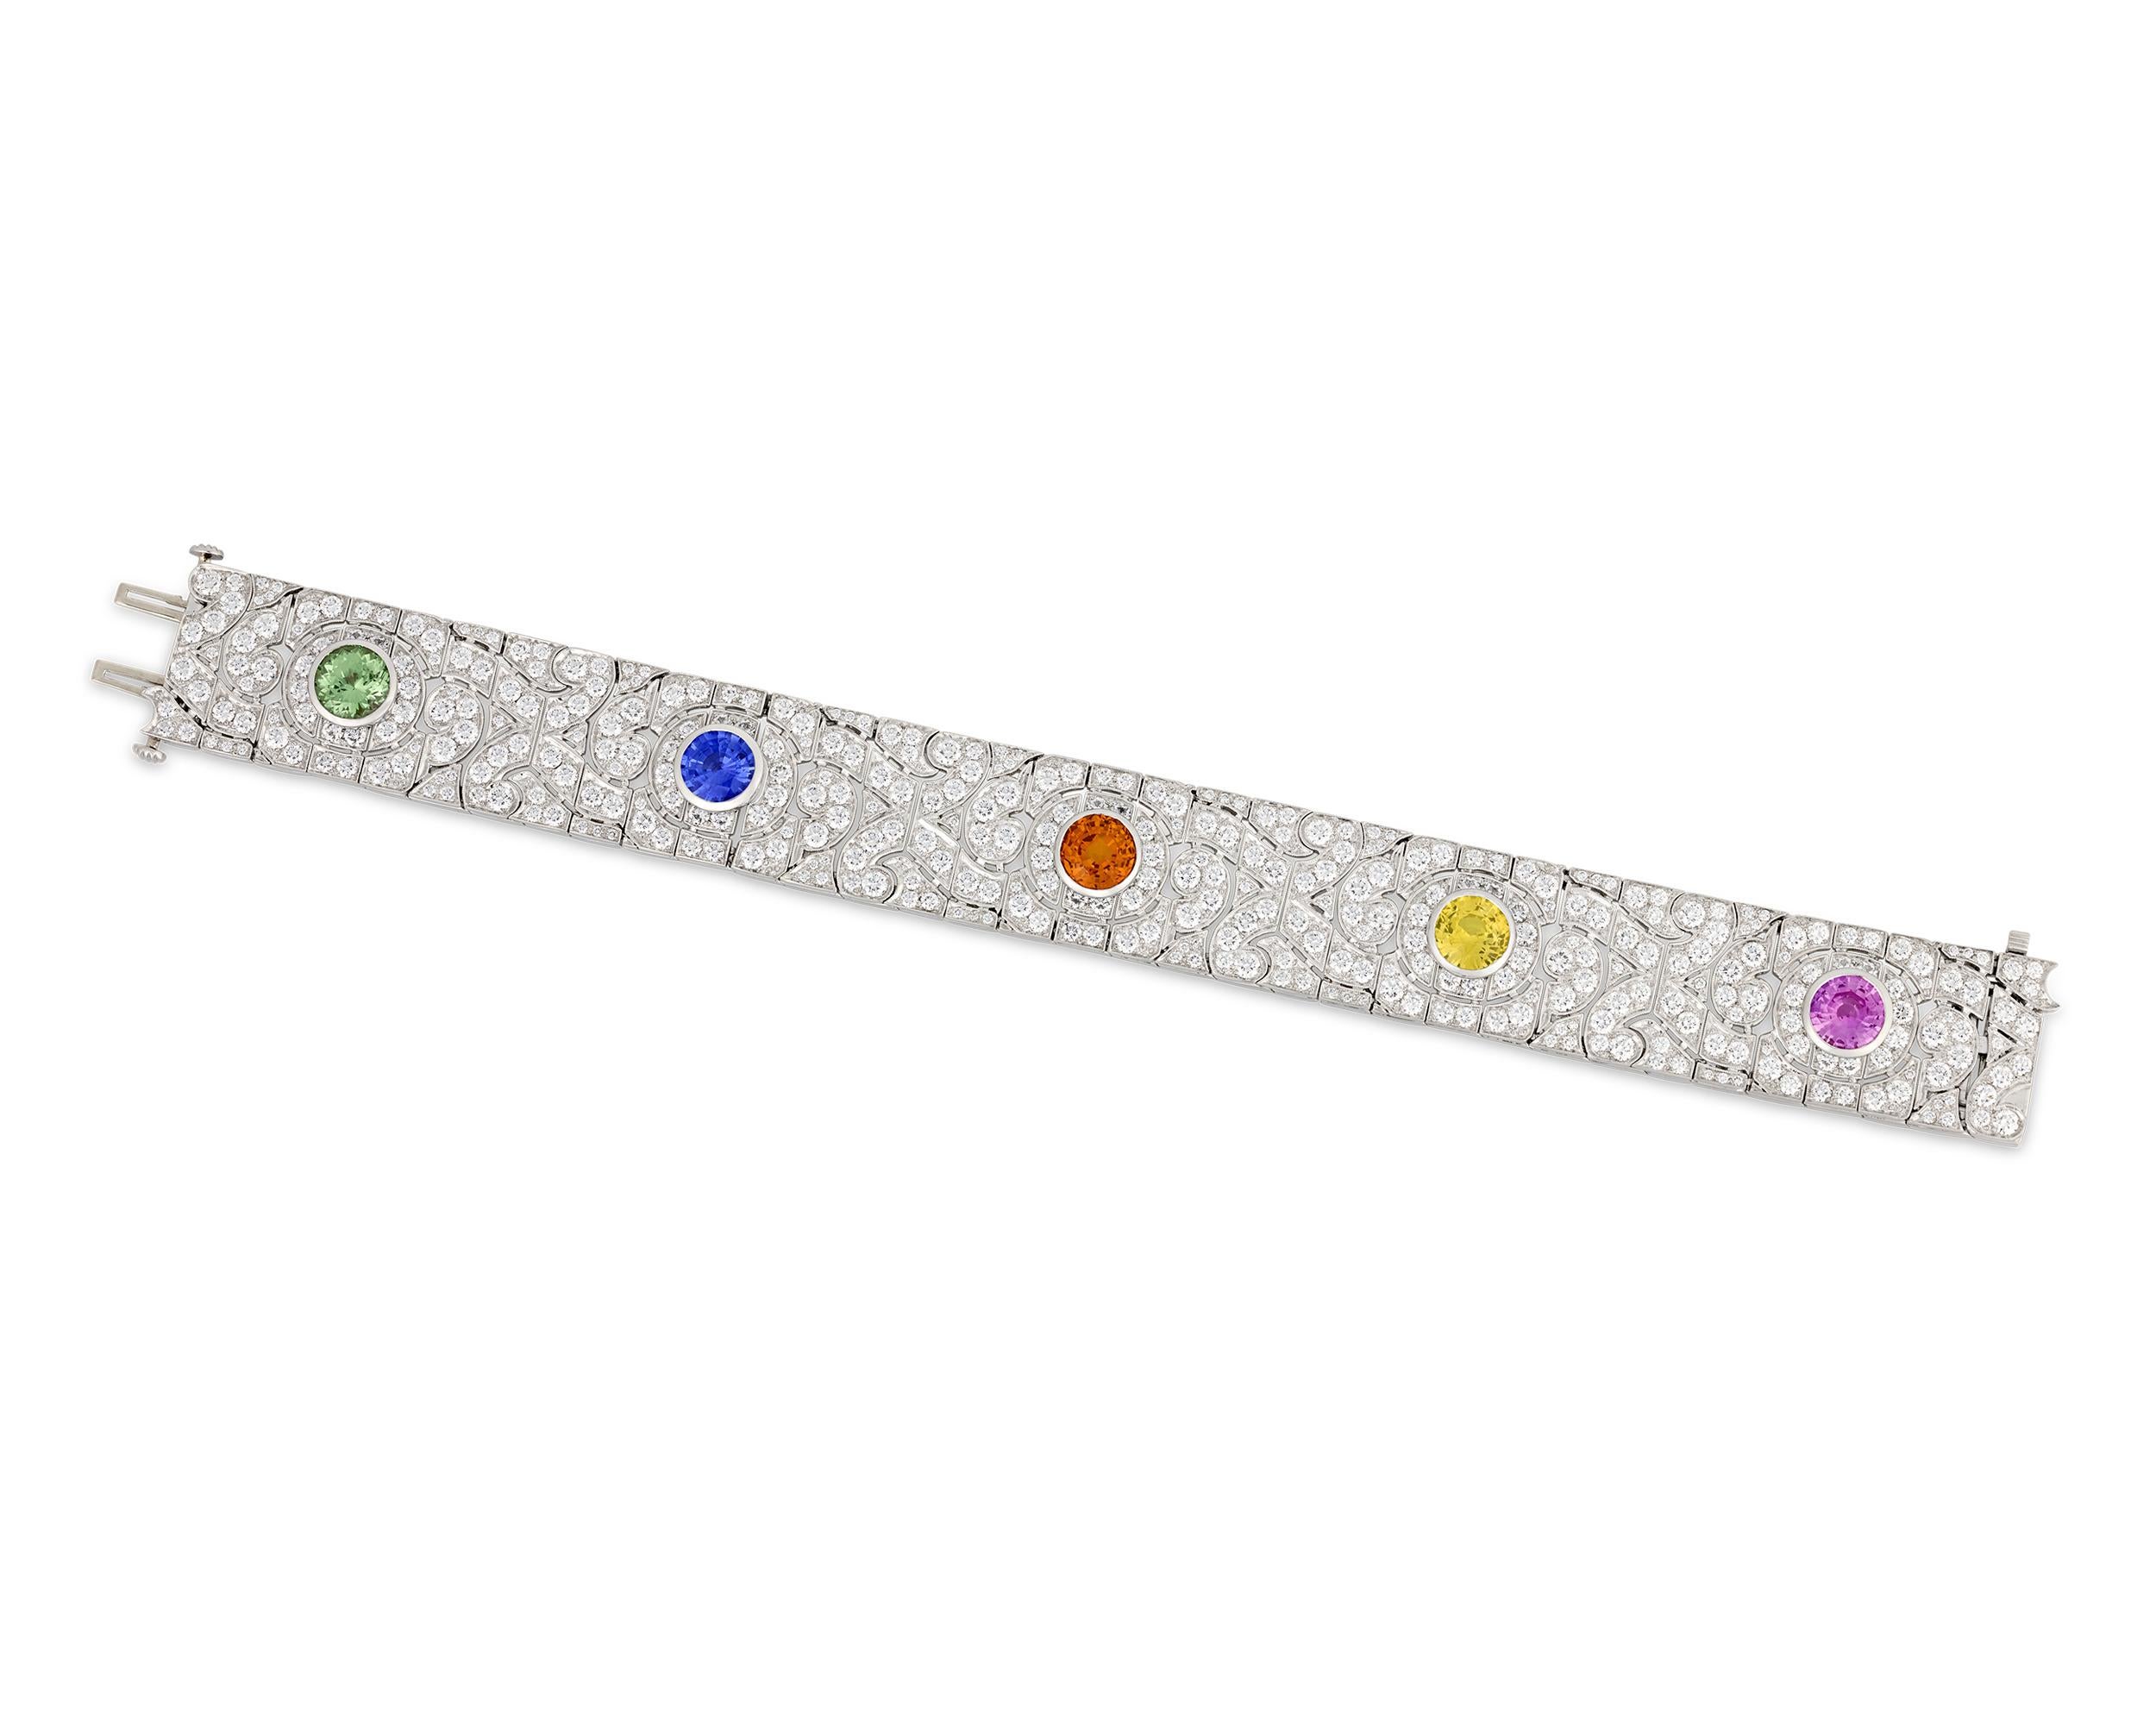 This exquisite bracelet from celebrated jewelry designer Oscar Heyman features a rainbow of colorful gemstones set amongst a sea of sparkling white diamonds. The design features a 2.71-carat orange sapphire, a 1.72-carat pink sapphire, a 1.73-carat